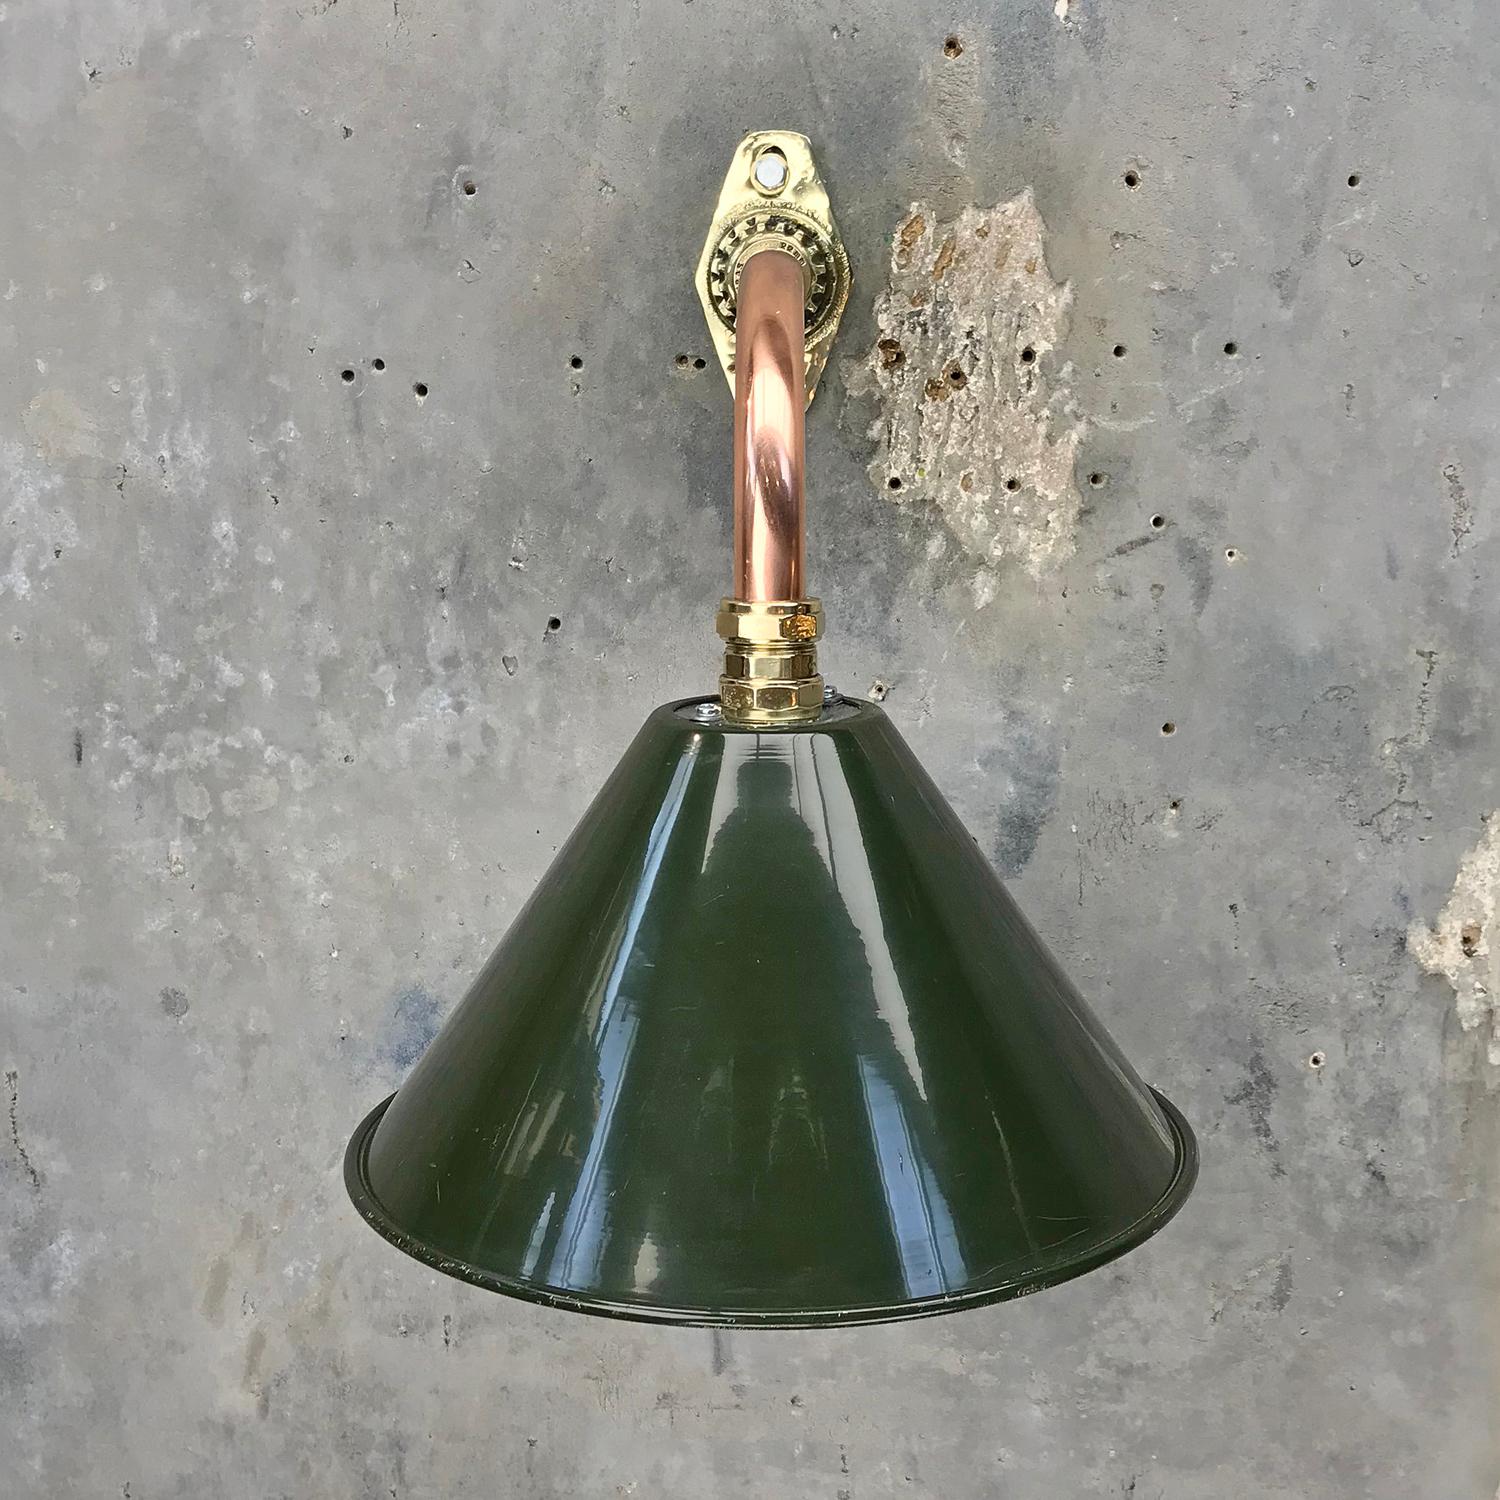 1980s Ex British Army Light Shade / Copper and Brass Cantilever, Original Green For Sale 2